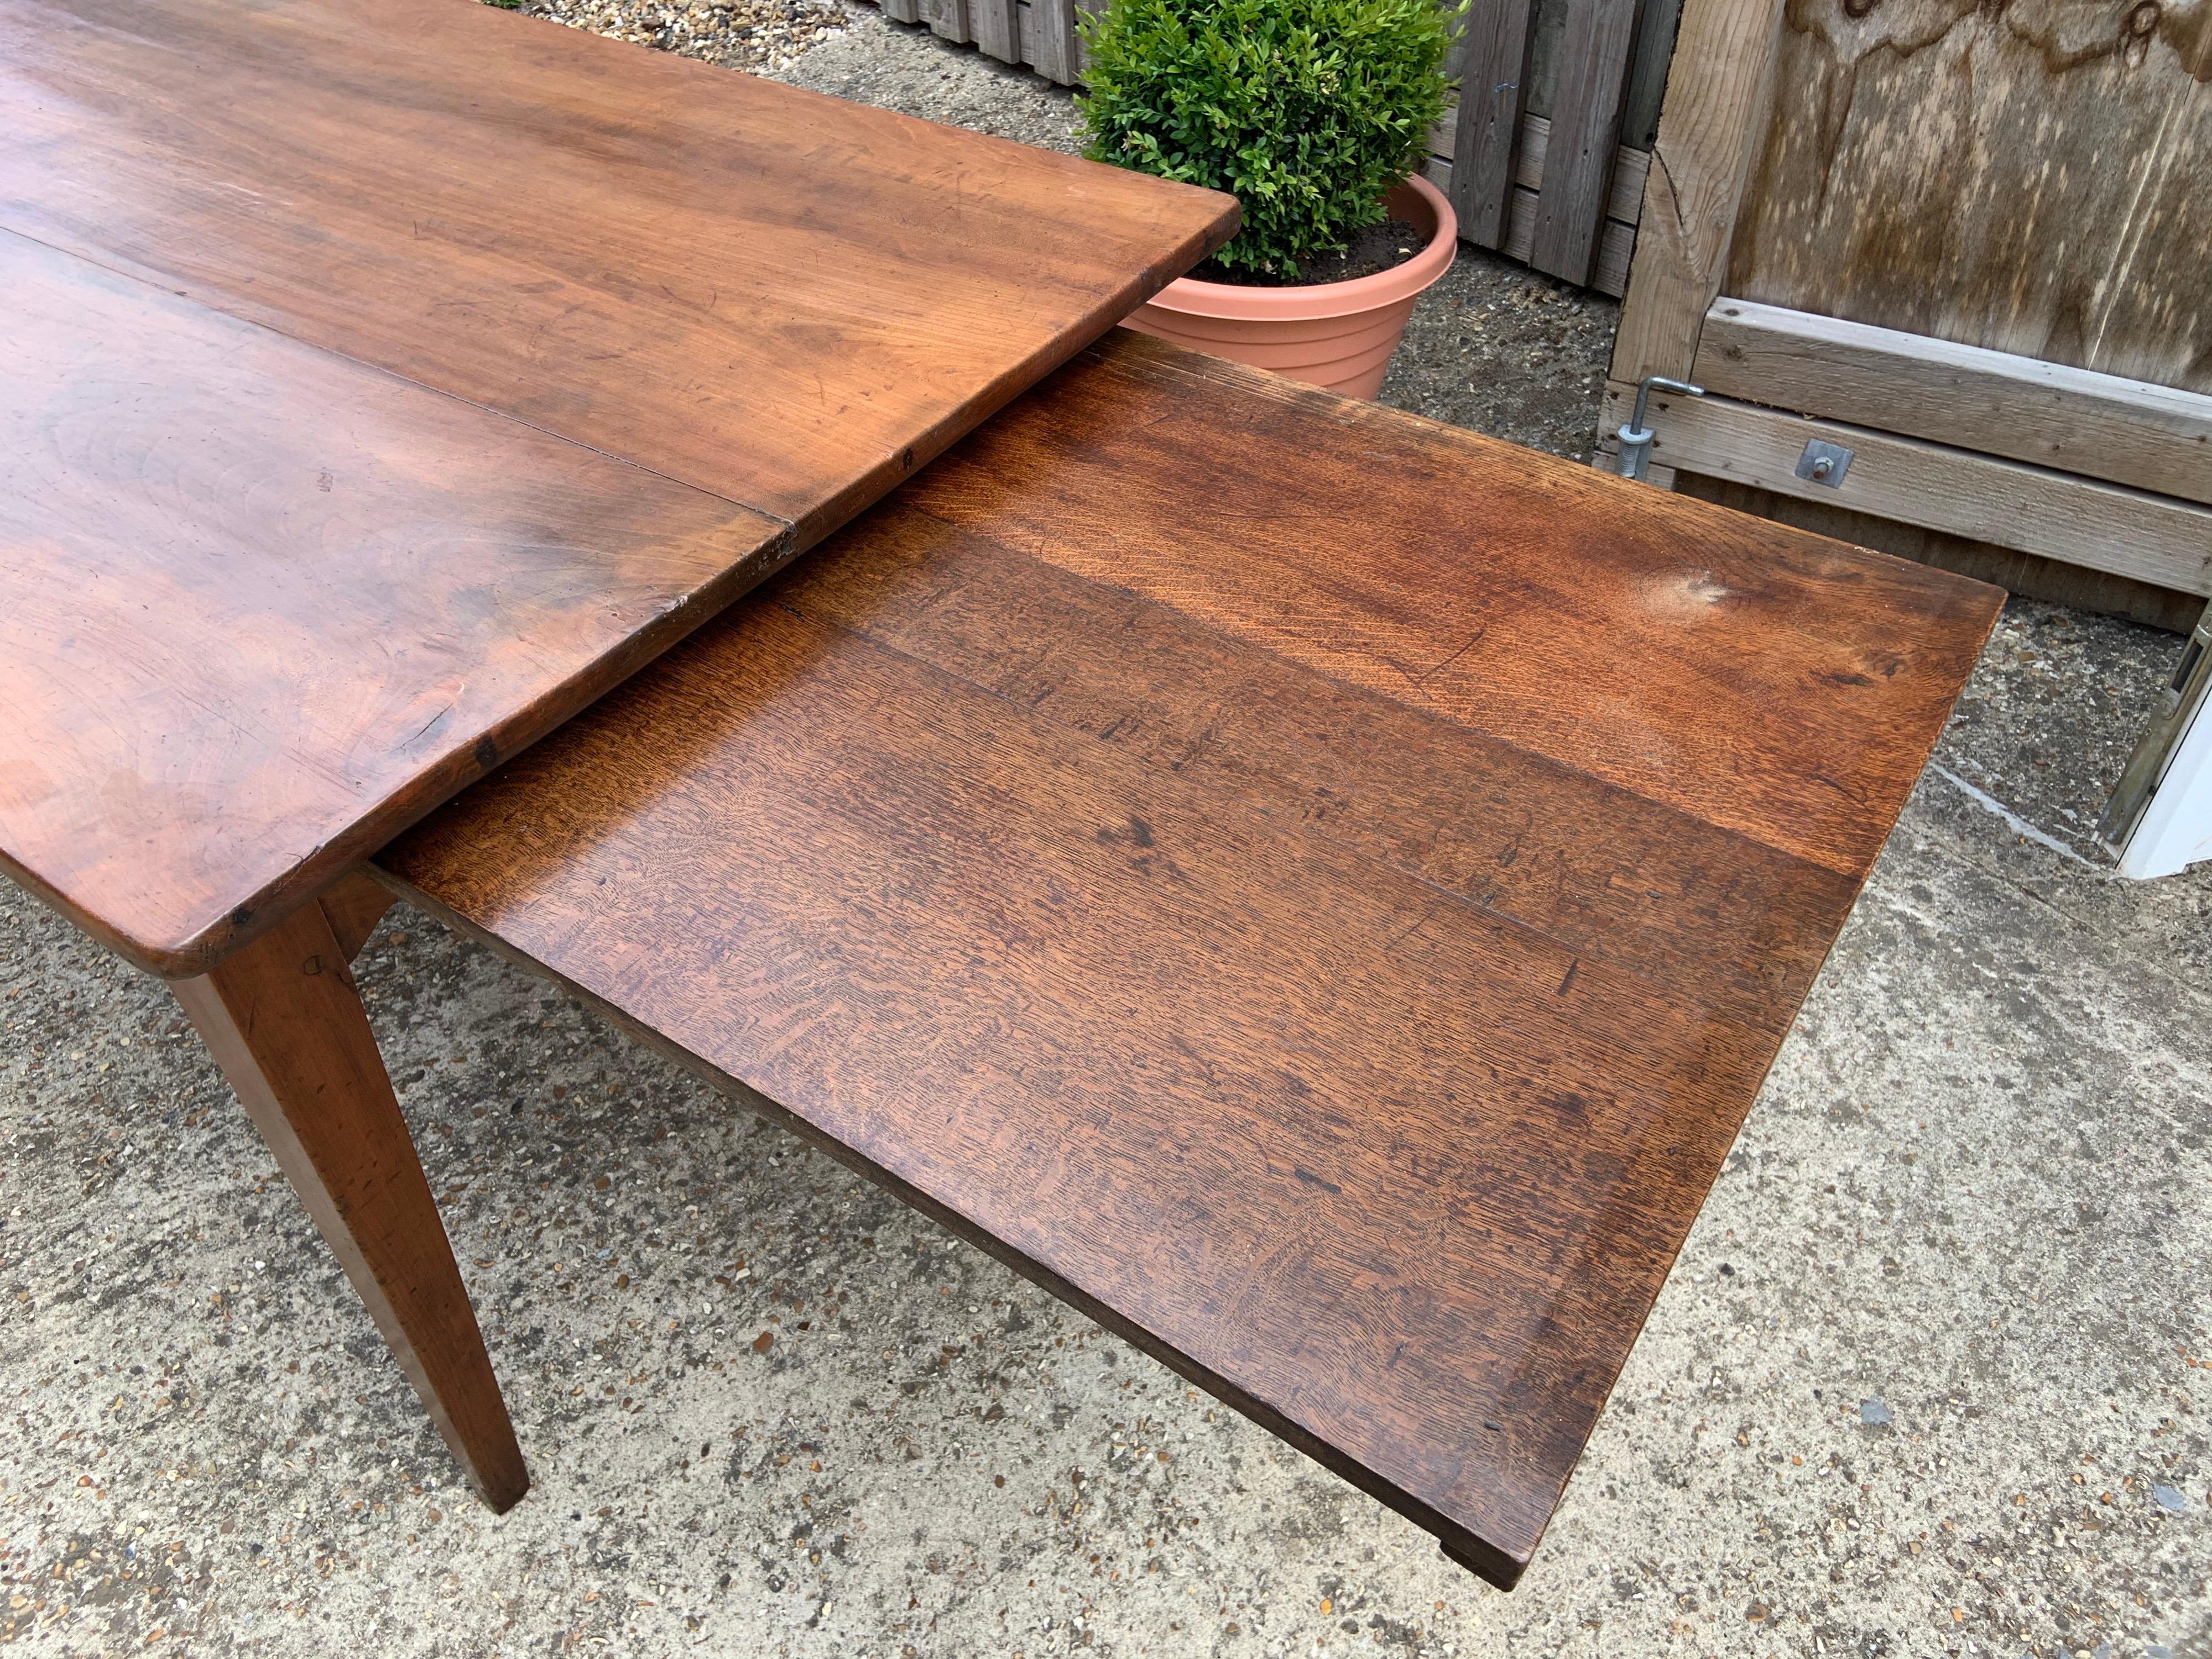 Early 19th century wide cherry farmhouse table with slide and tapered legs. Table has a three plank top which sits on a sturdy cherry base. Beautiful color and patination.